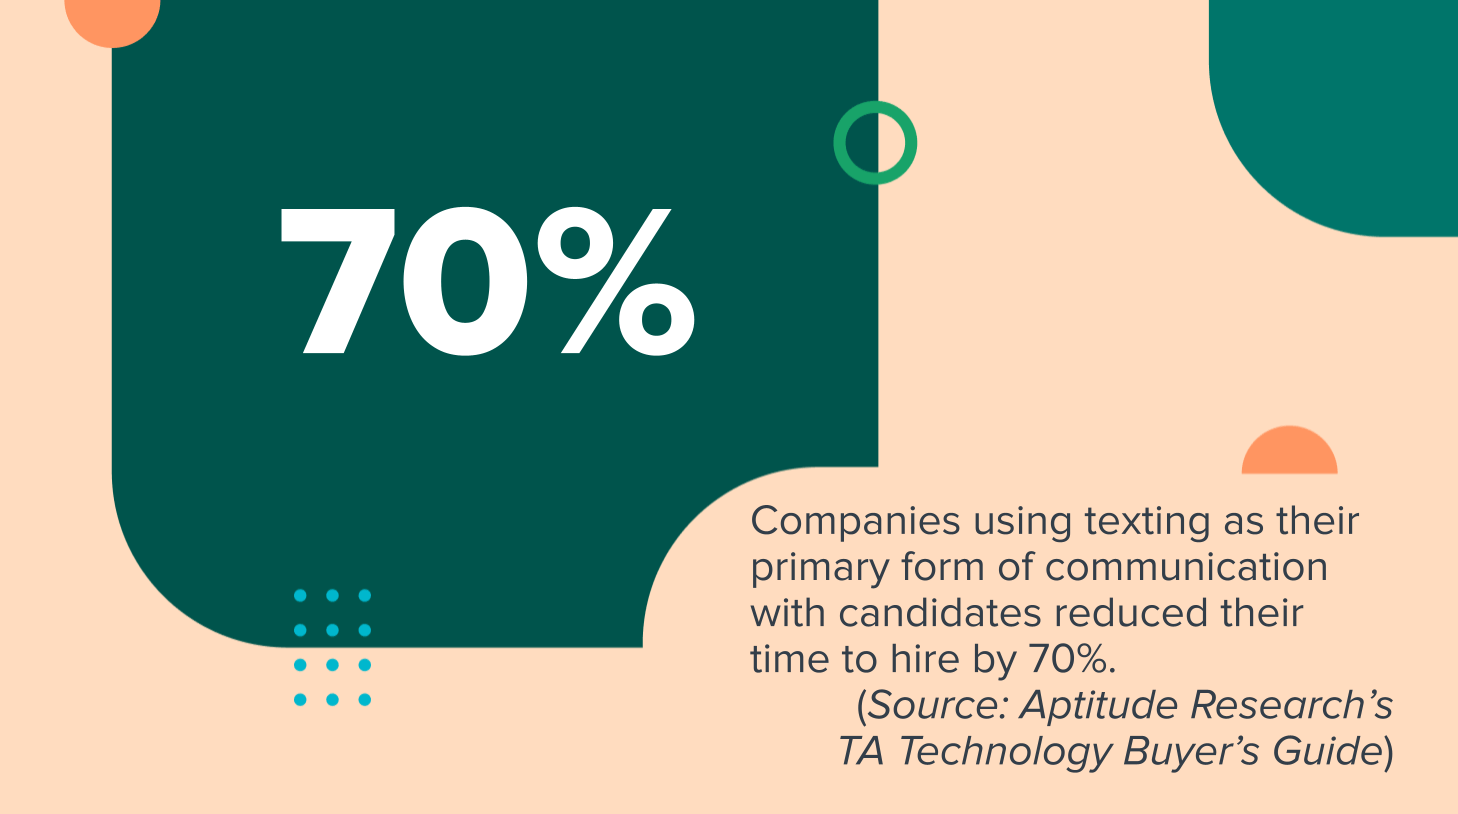 Companies using texting as their primary form of communication with candidates reduced their time to hire by 70%. (Source: Aptitude Research’s TA Technology Buyer’s Guide)